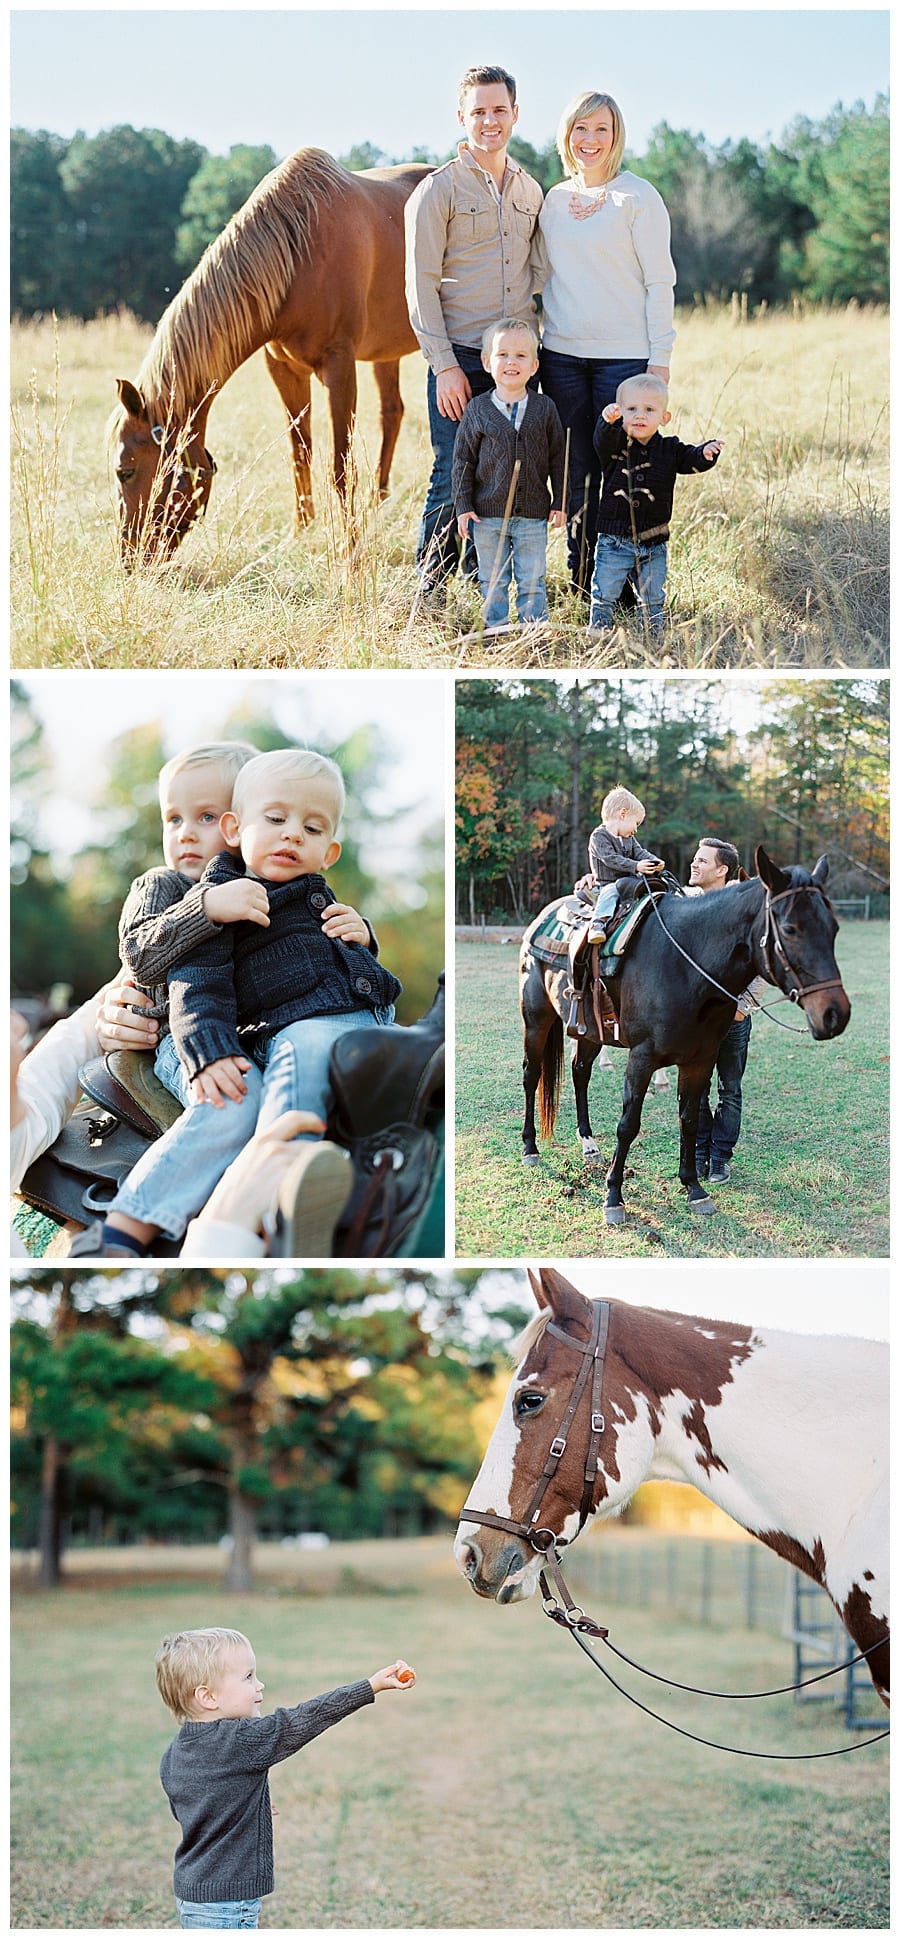 exciting and adventurous Spring family photo session at Callidora Ranch in georgia!